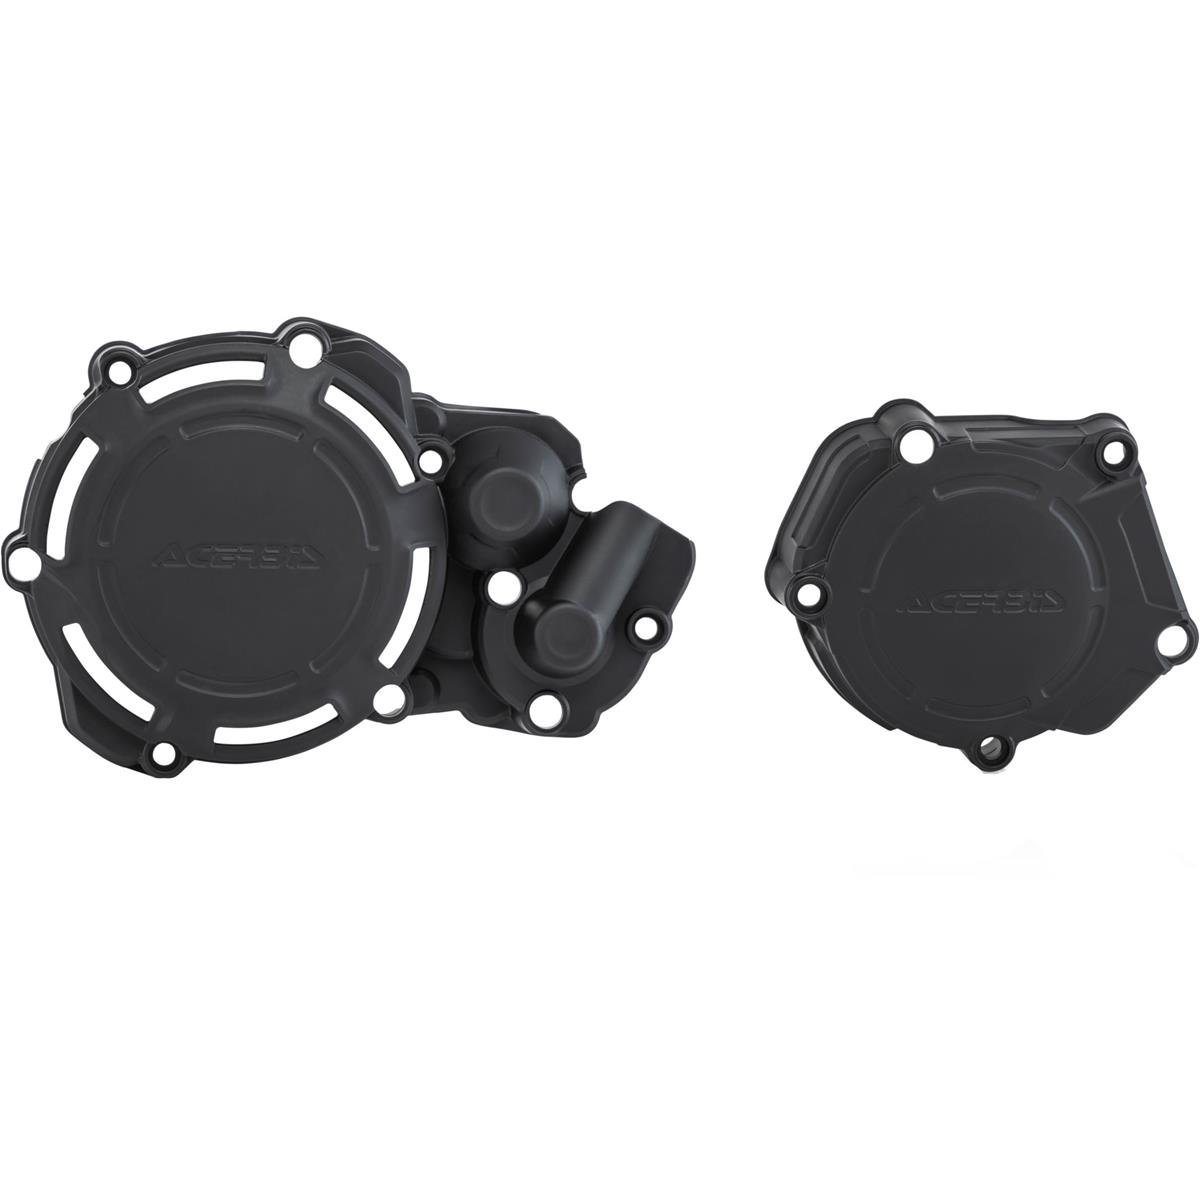 Acerbis Clutch/Ignition Cover Protection X-Power Fantic XX 250 21-, Yamaha YZ 250 06-21, Black